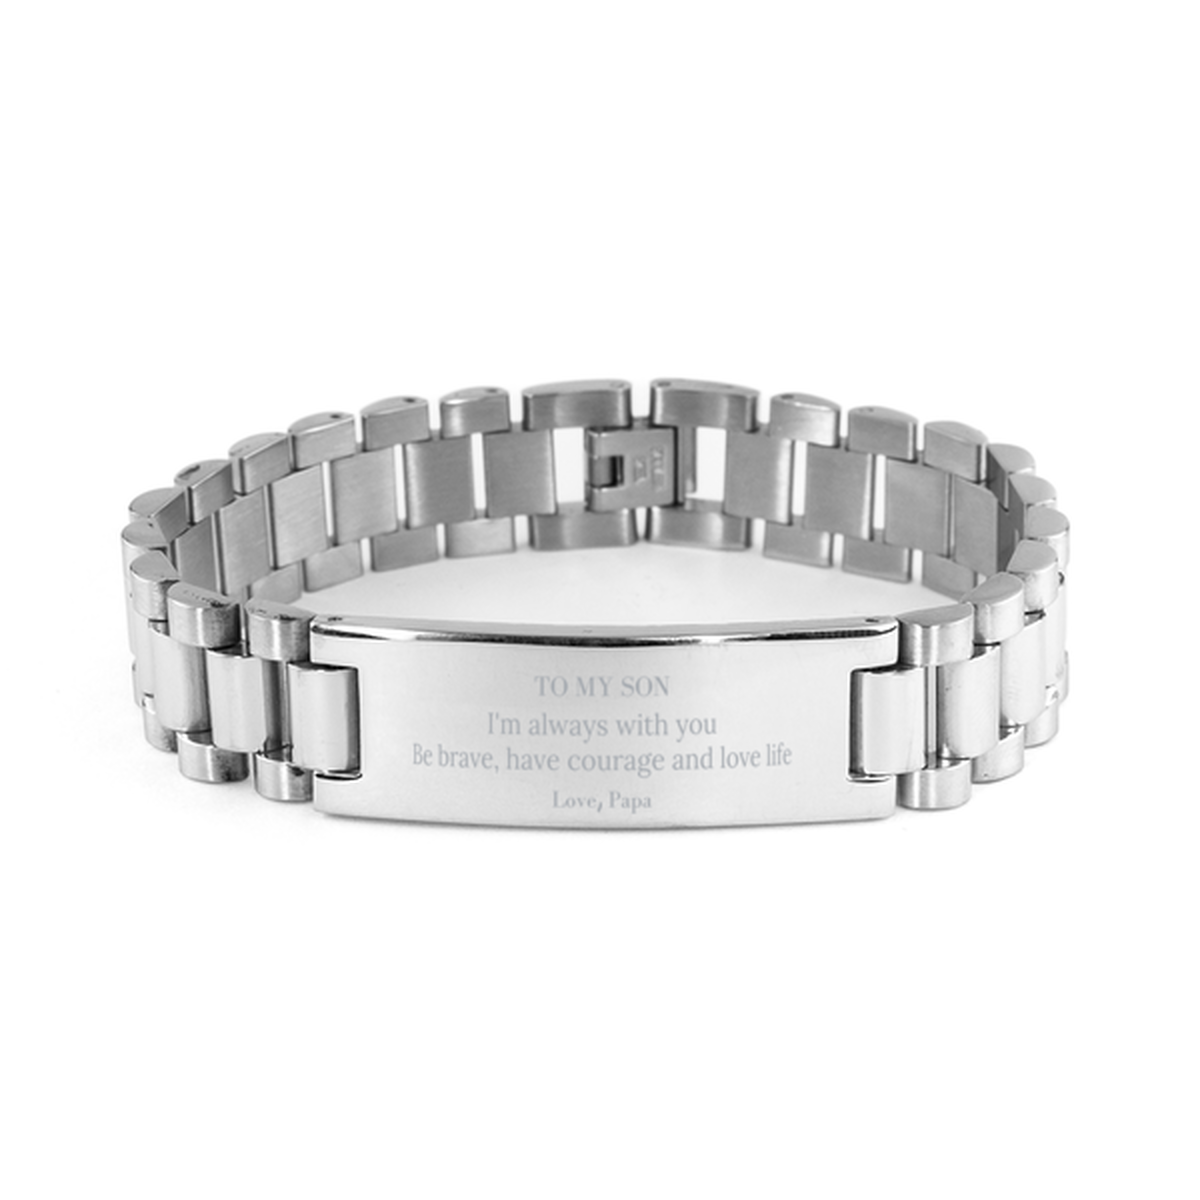 To My Son Gifts from Papa, Unique Ladder Stainless Steel Bracelet Inspirational Christmas Birthday Graduation Gifts for Son I'm always with you. Be brave, have courage and love life. Love, Papa